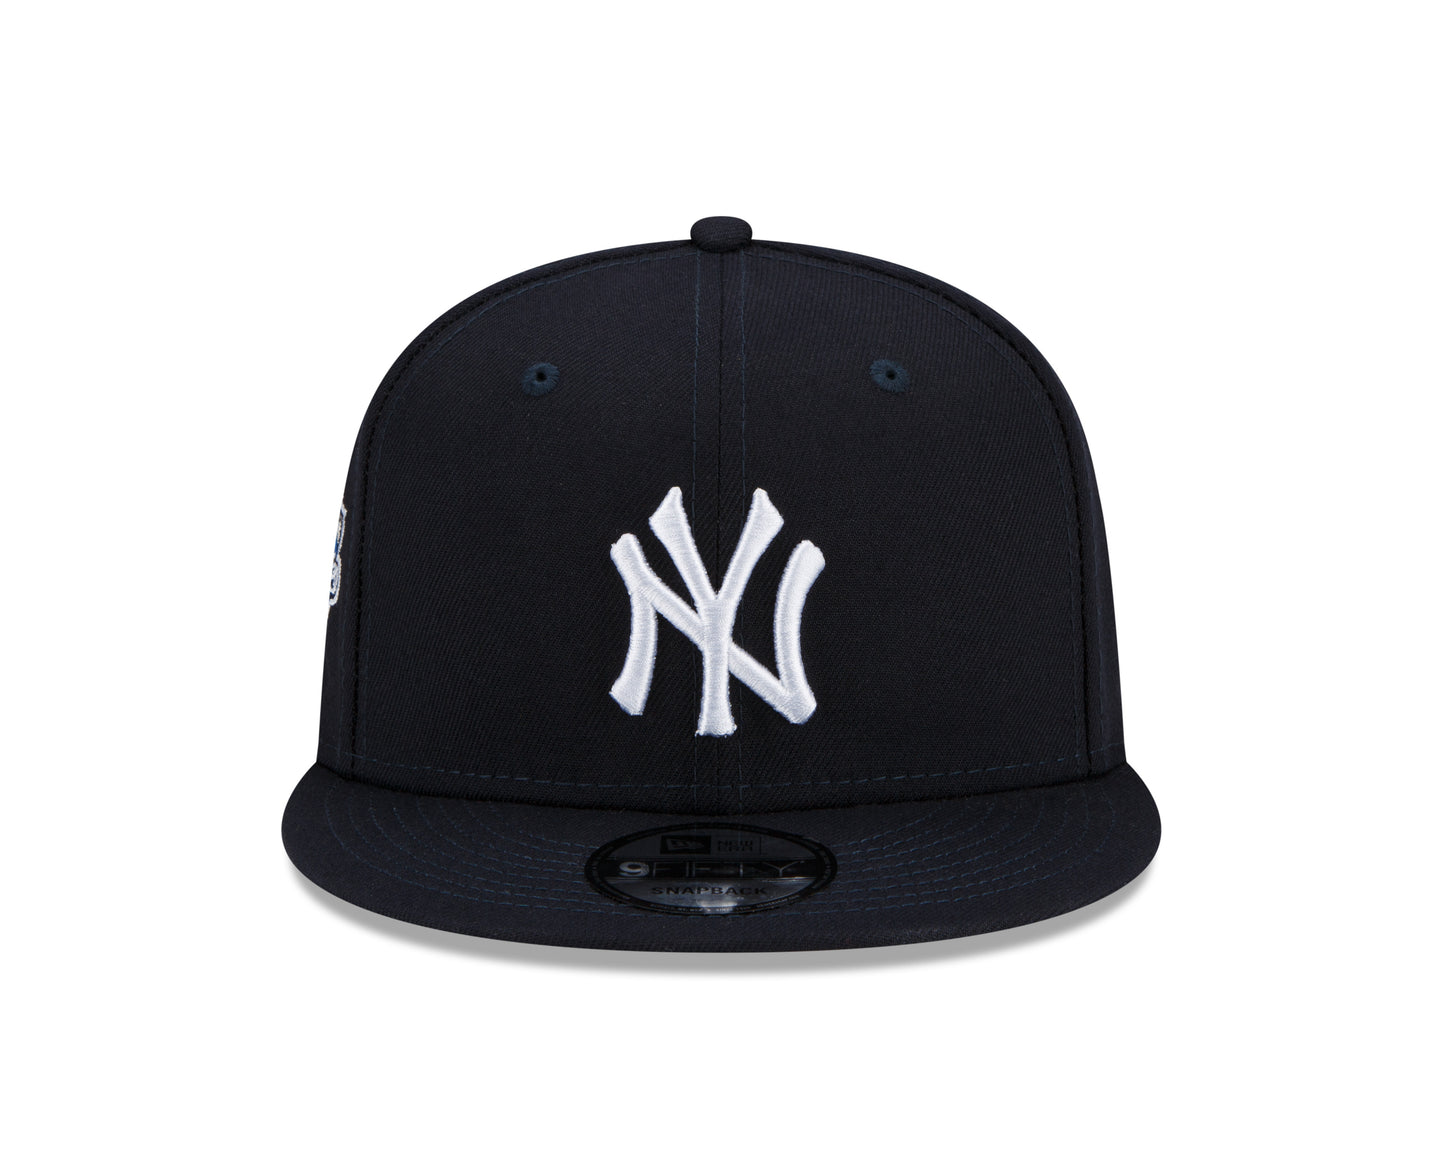 New Era New York Yankees Navy 2008 All Star Game 9FIFTY Snapback Adjustable Hat